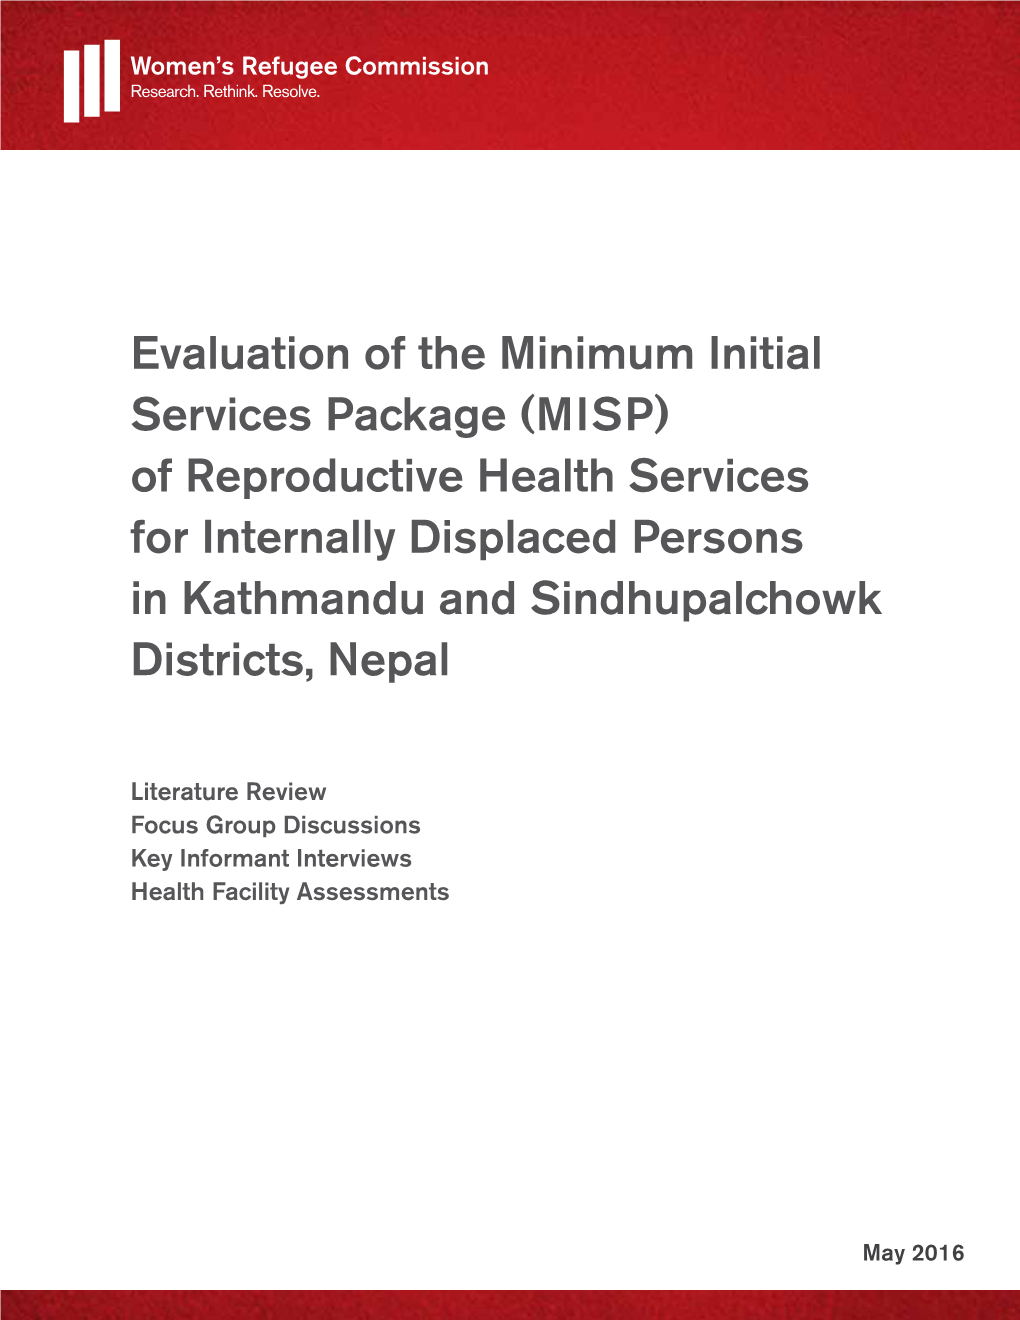 MISP) of Reproductive Health Services for Internally Displaced Persons in Kathmandu and Sindhupalchowk Districts, Nepal